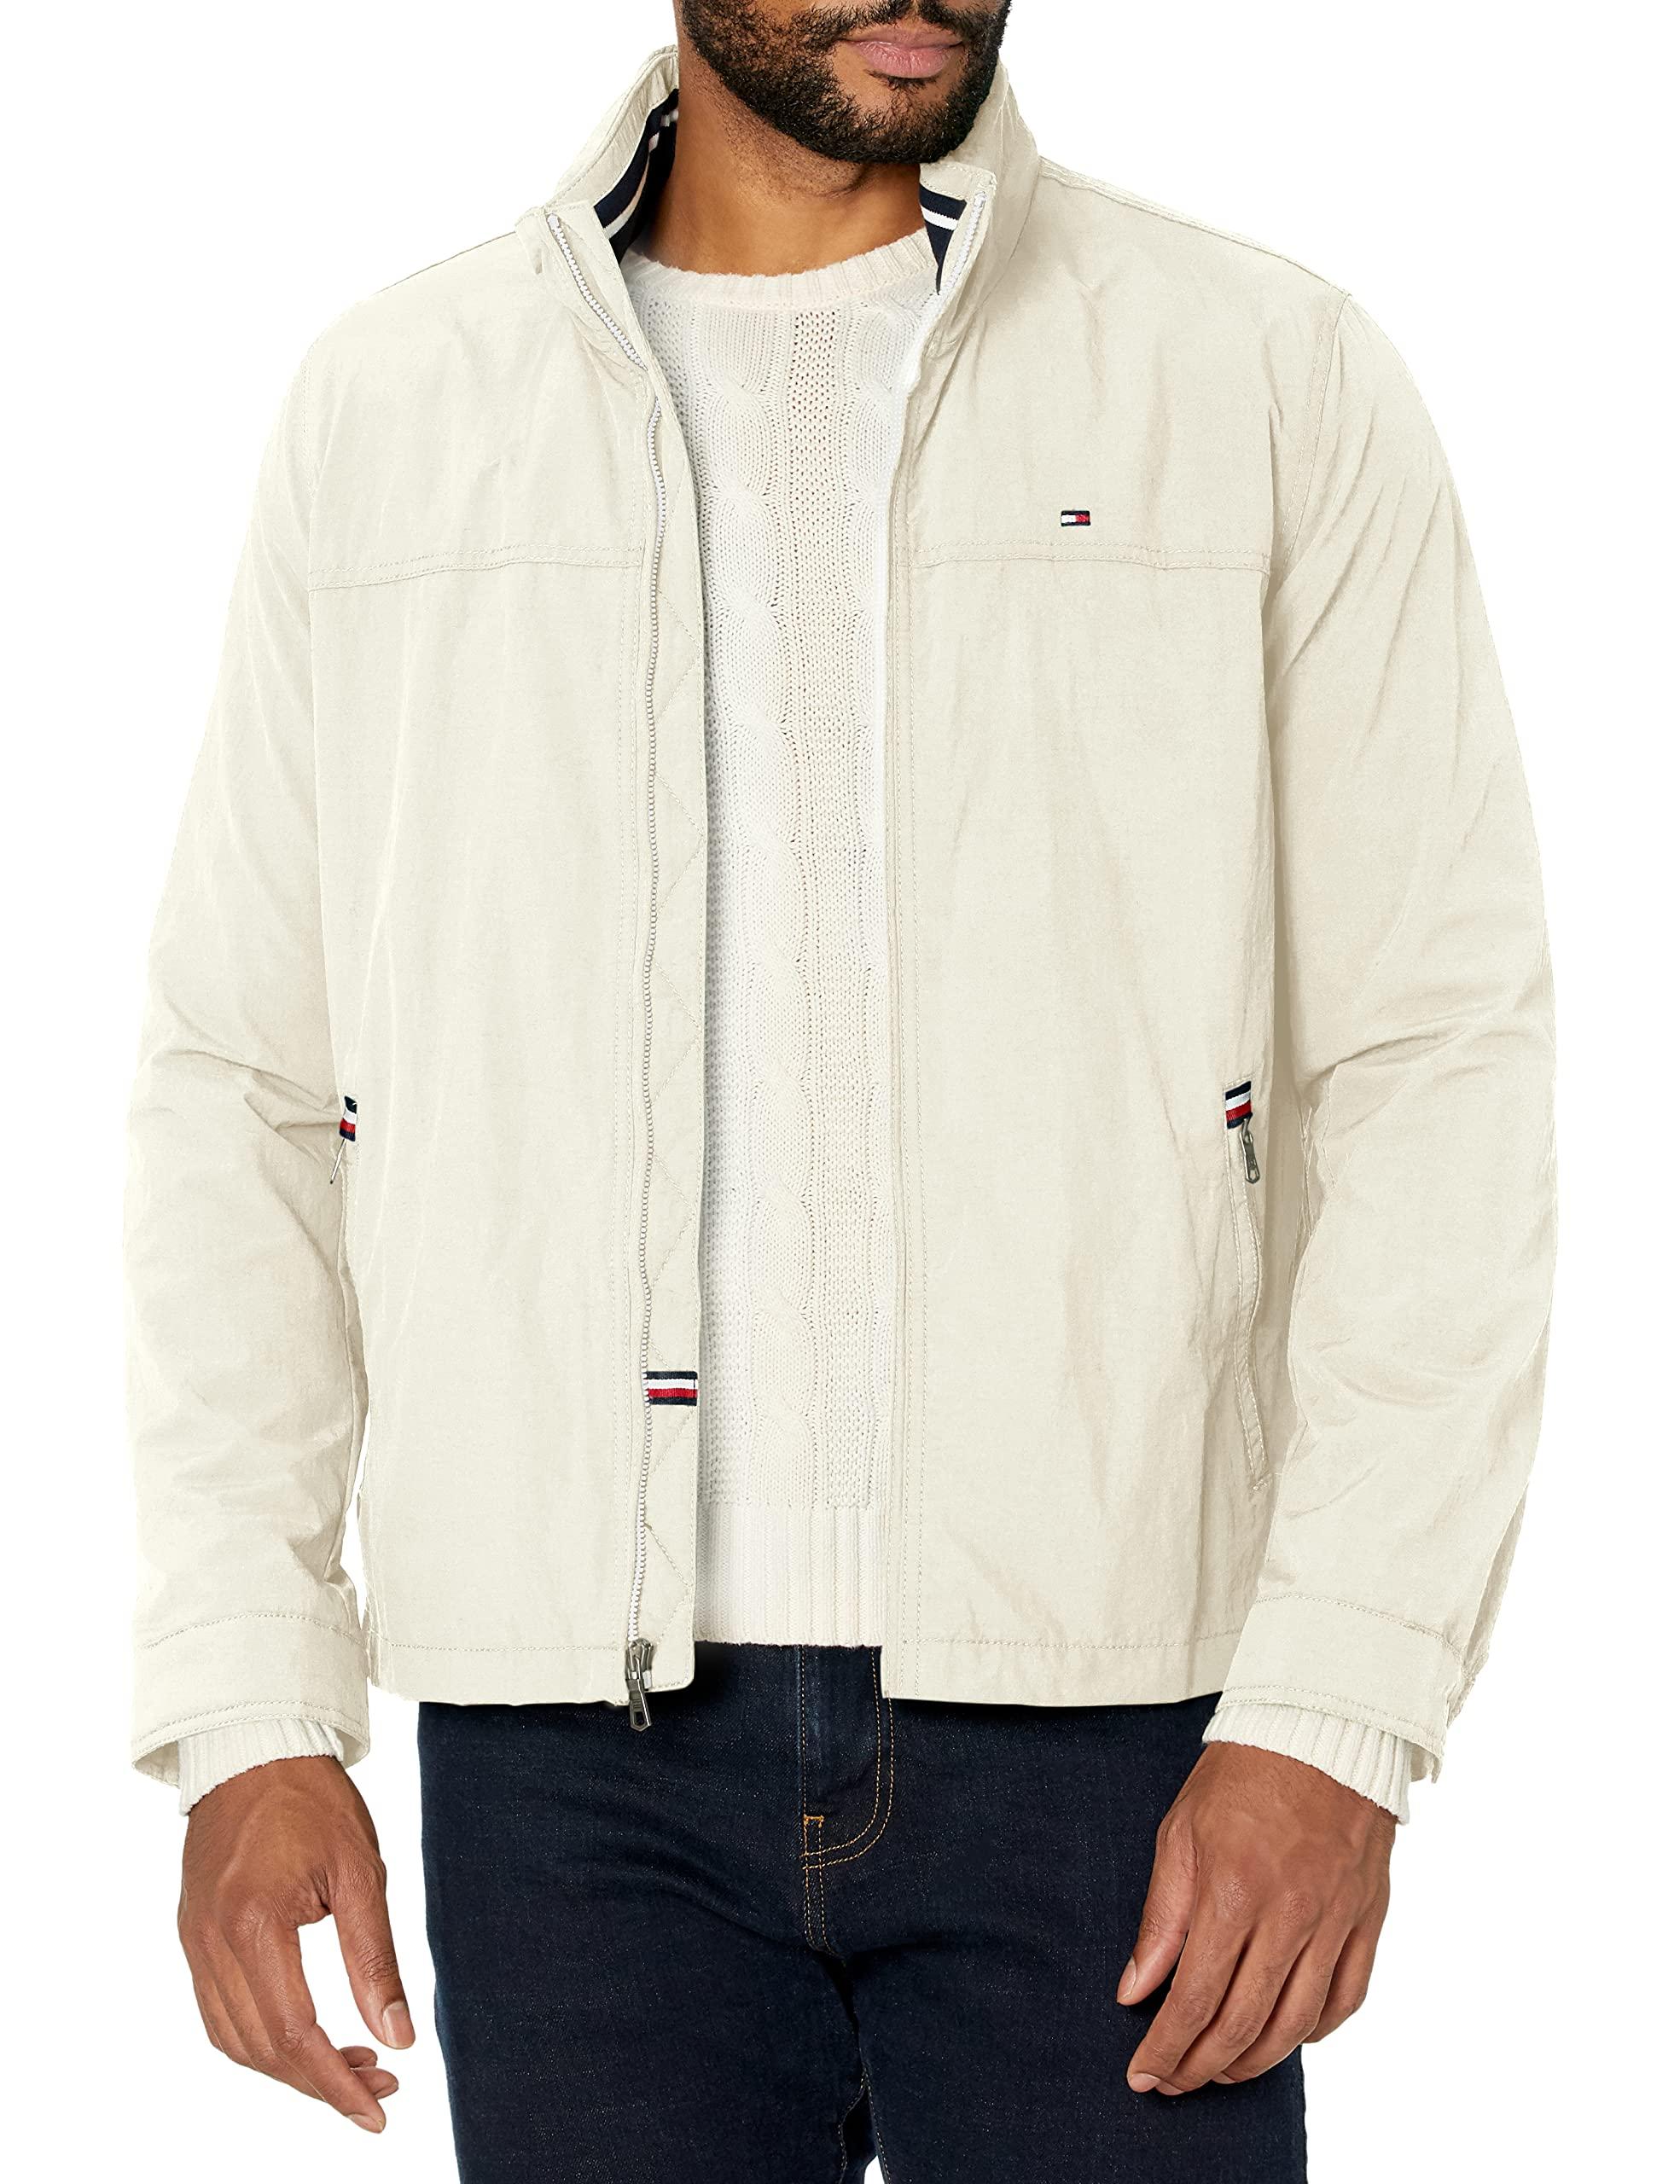 Tommy Hilfiger Synthetic Stand Collar Lightweight Yachting Jacket in Ice  (White) for Men - Save 39% - Lyst